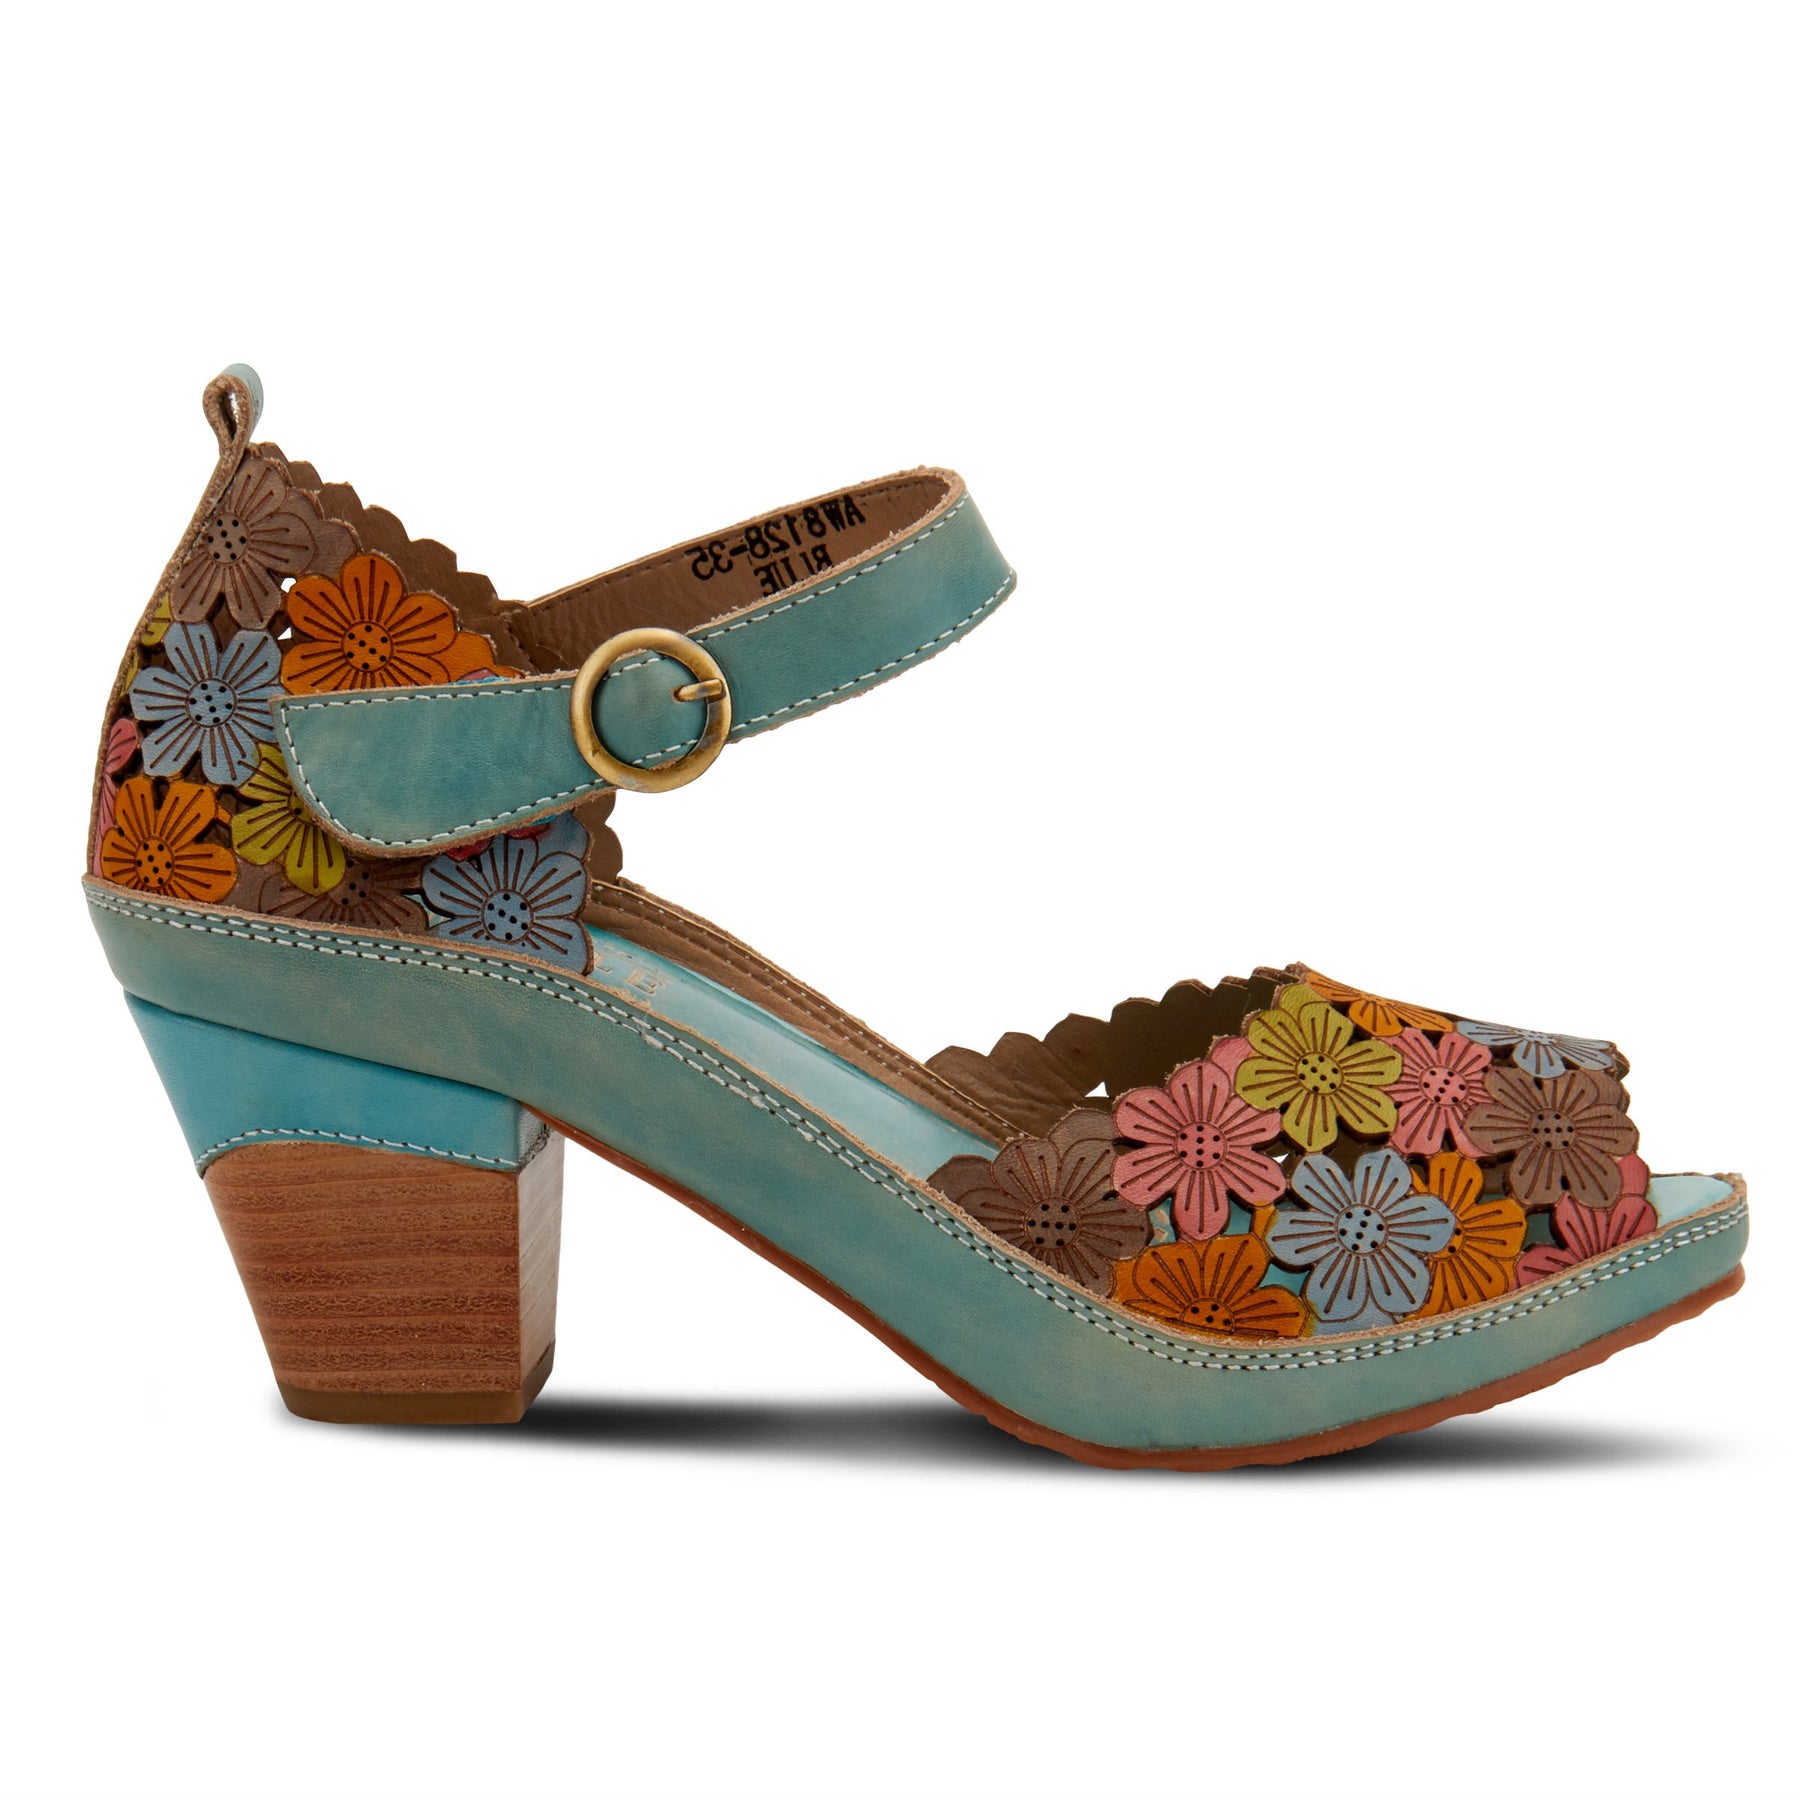 AVNIA ANKLE STRAP SHOE by L'ARTISTE – Spring Step Shoes